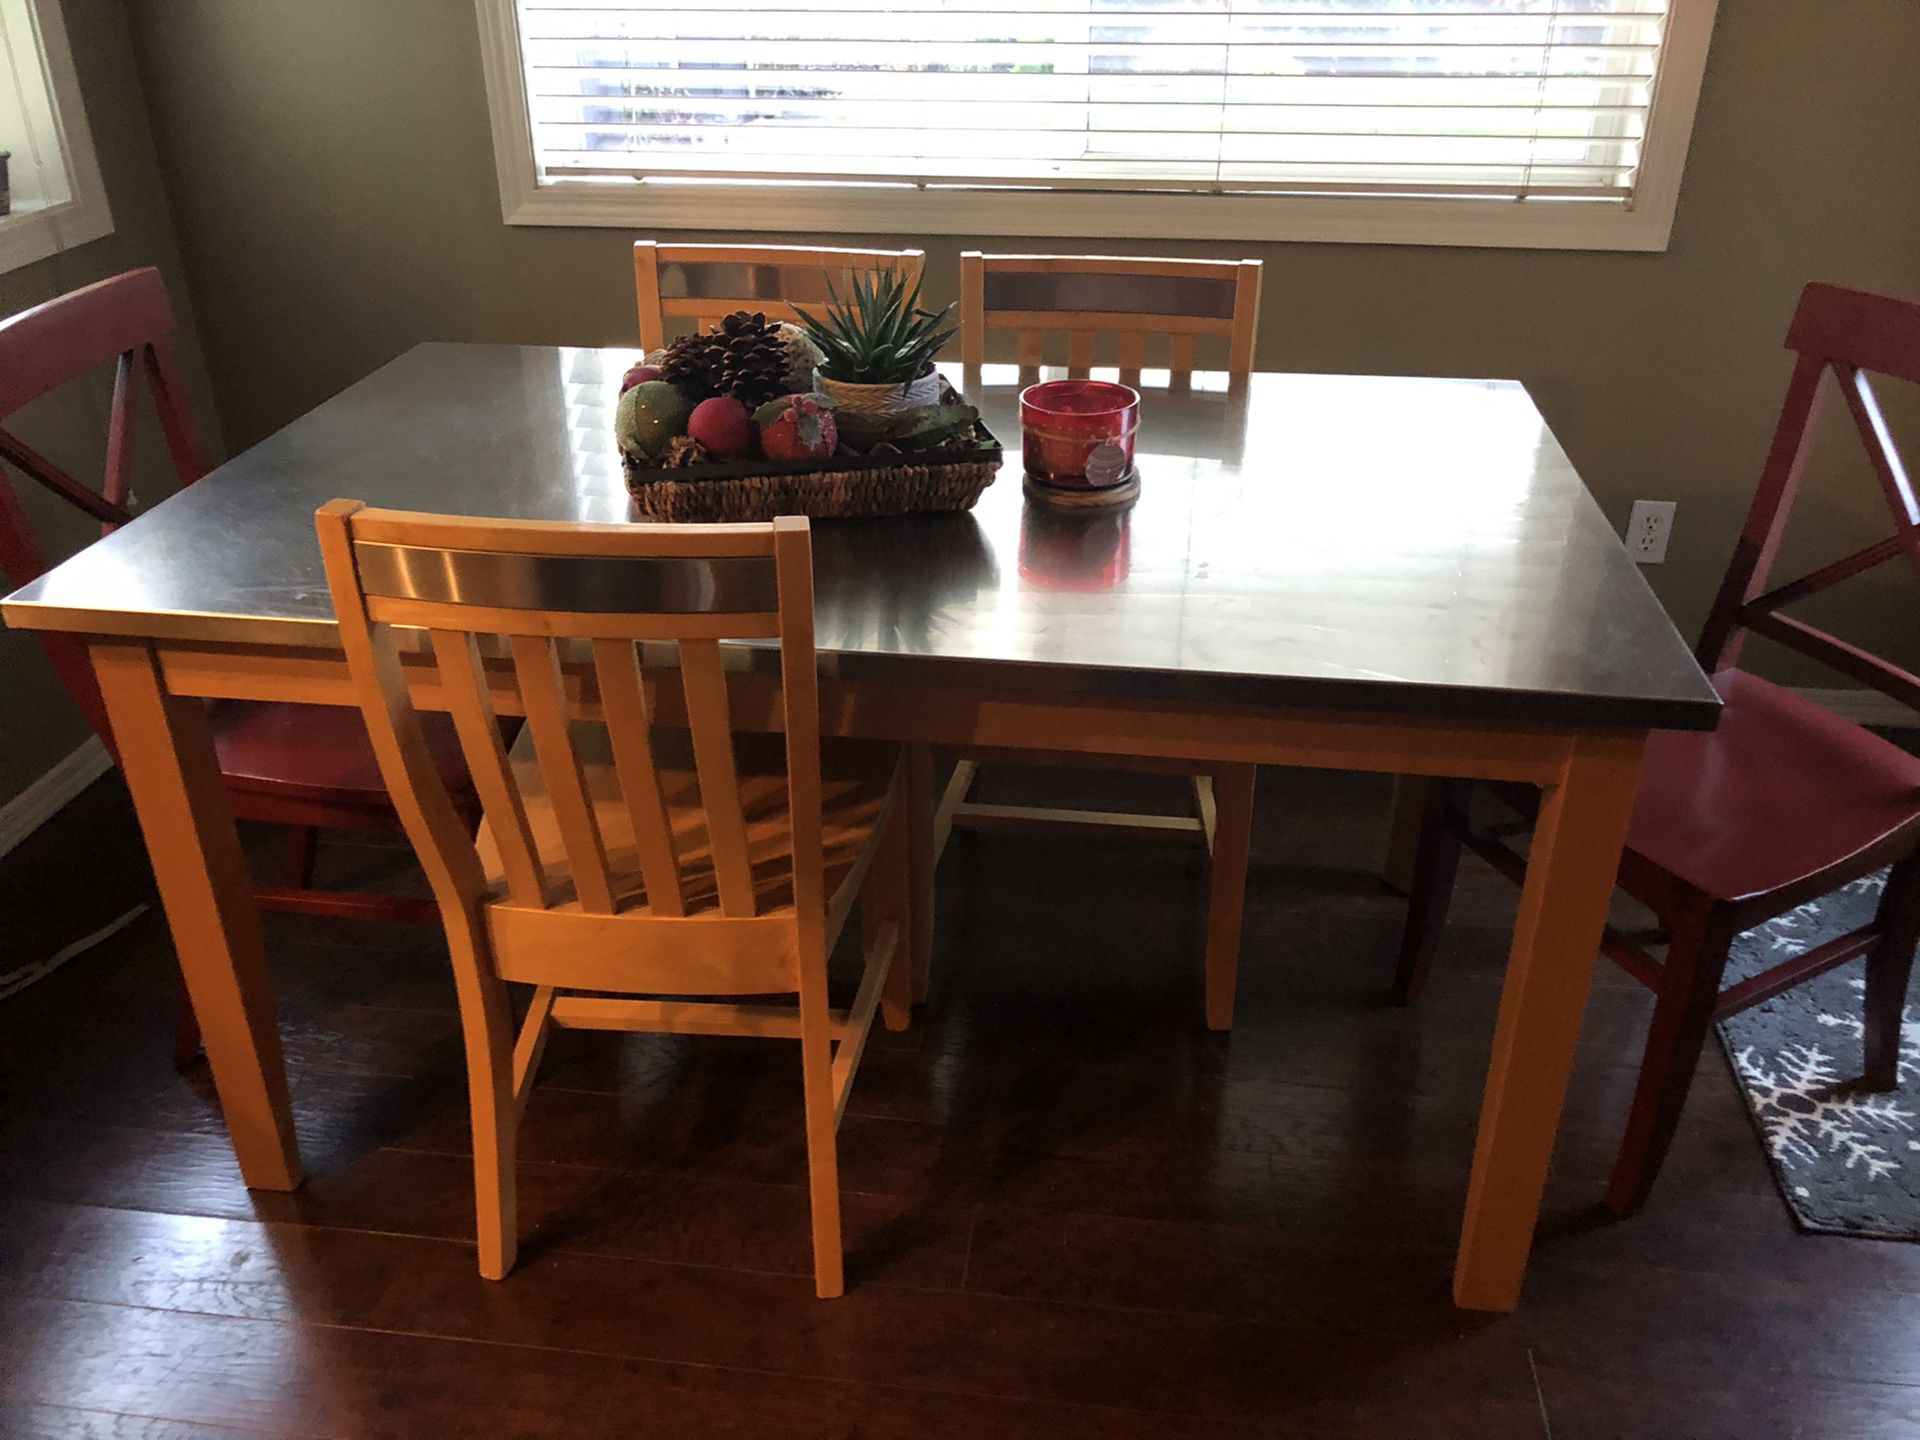 Breakfast nook table and chairs